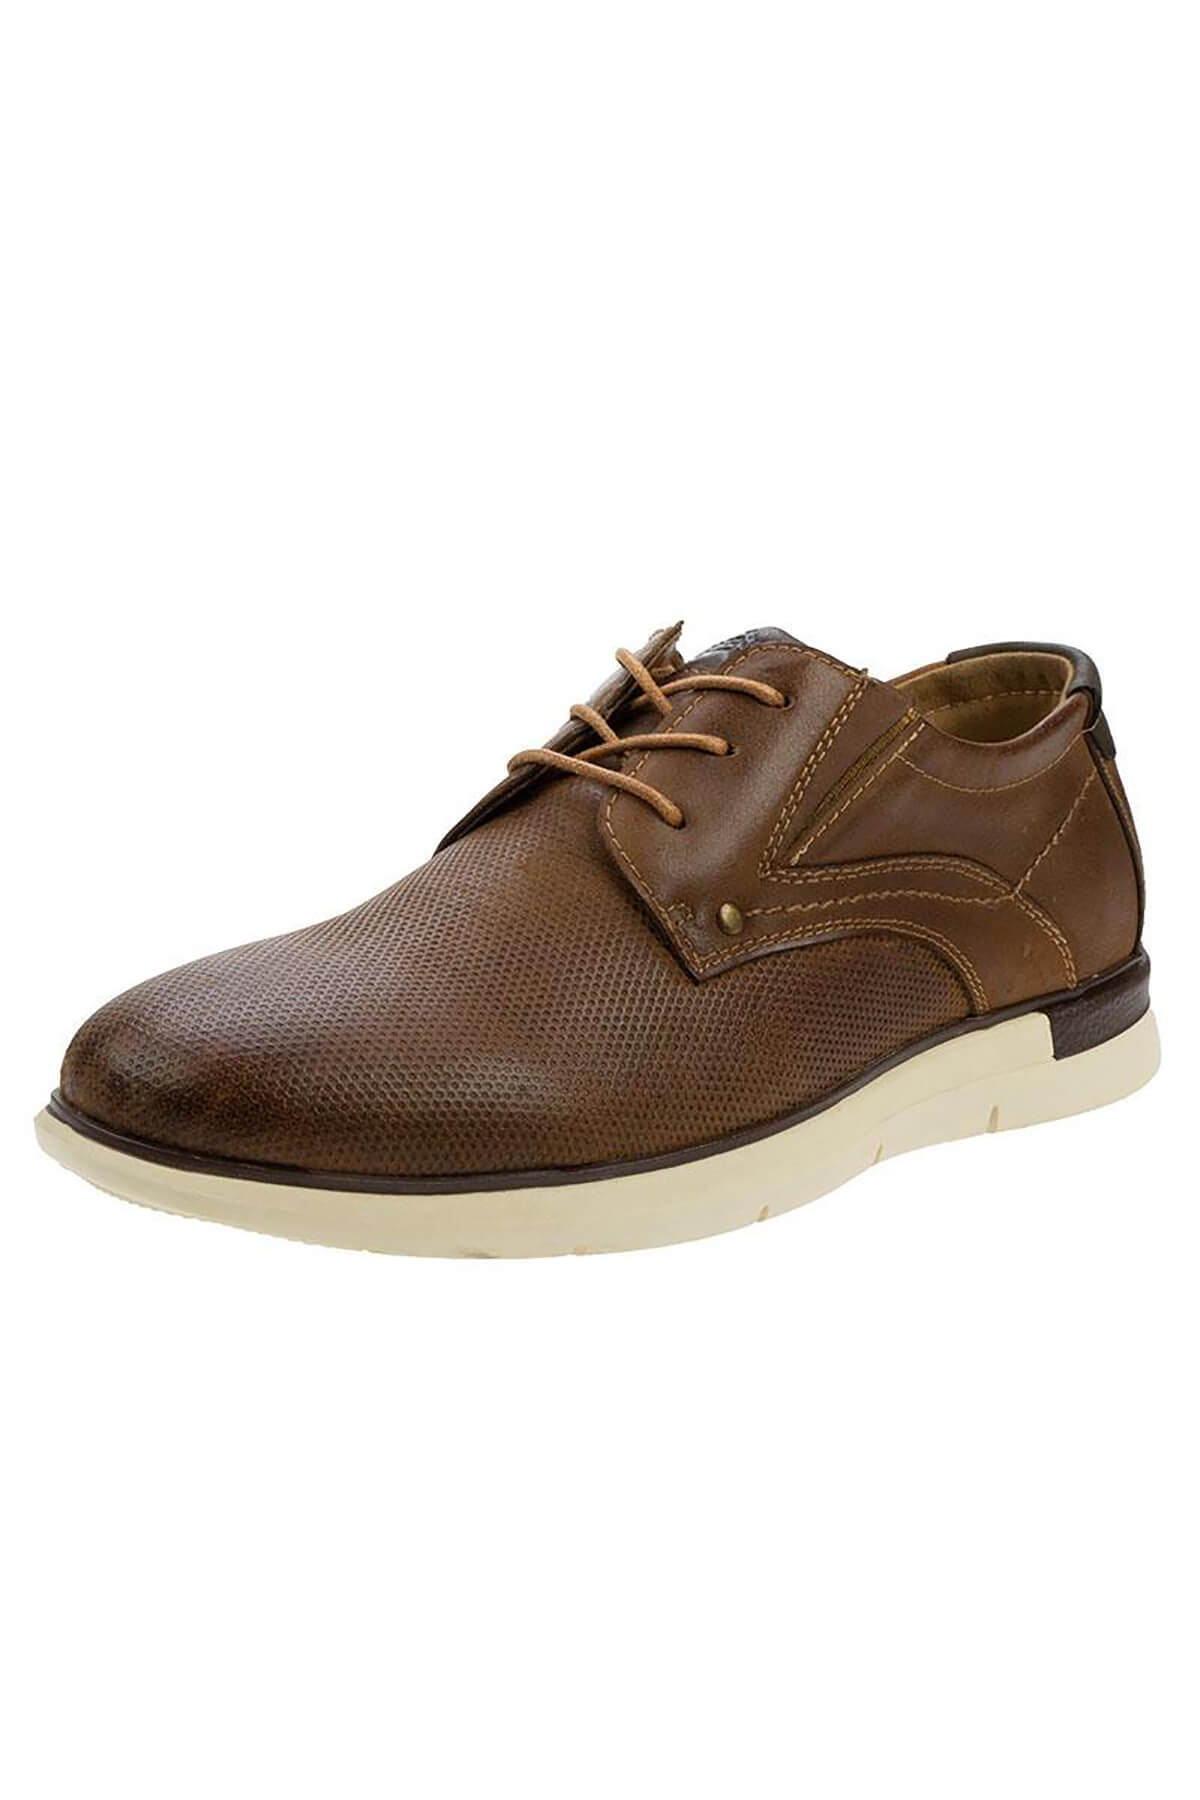 Greenstep Shoes Lace Up Nubuck